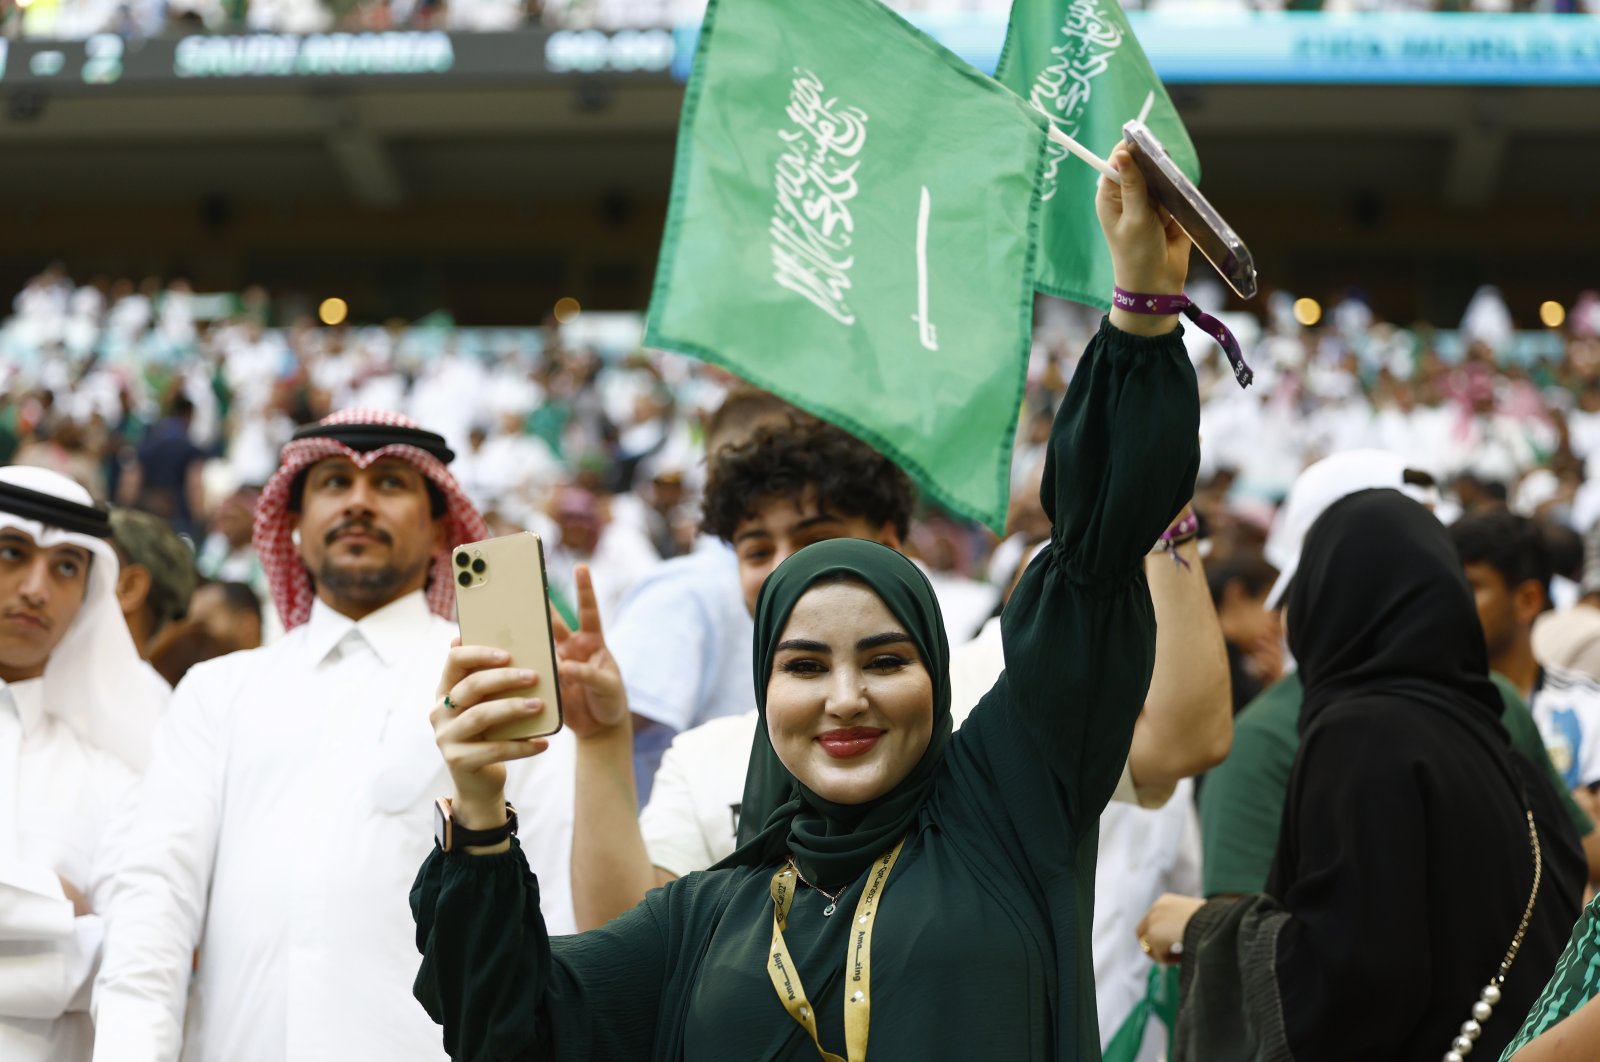 Fans of Saudi Arabia cheer during the FIFA World Cup Qatar 2022 Group C match between Argentina and Saudi Arabia at Lusail Stadium, Nov. 22, 2022, Lusail City, Qatar. (Getty Images)